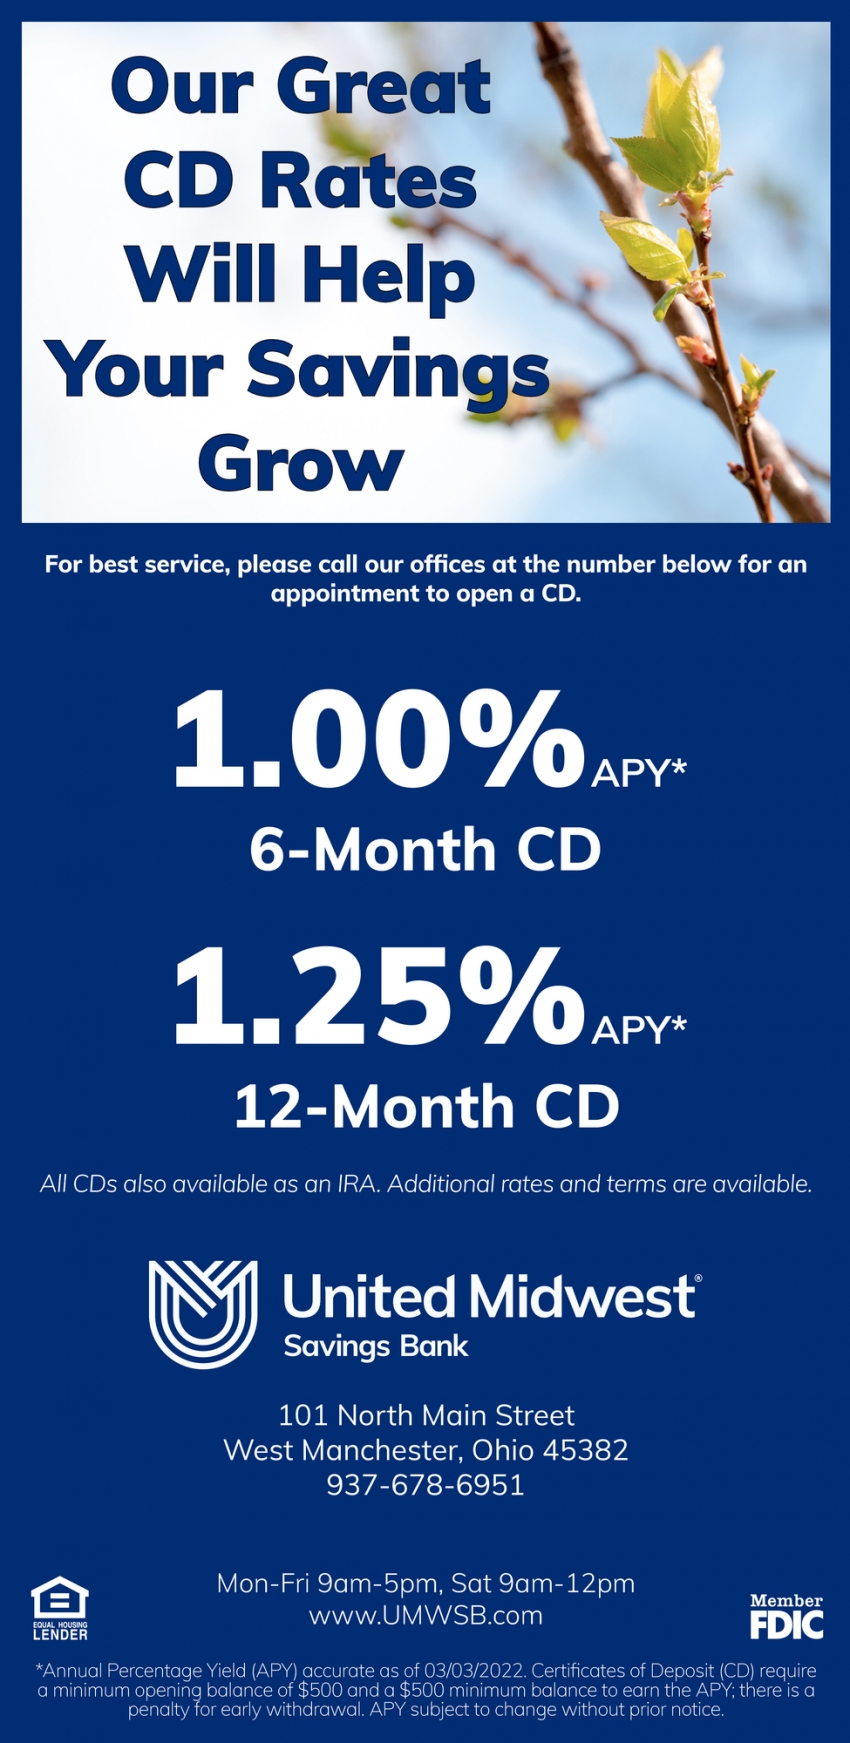 Our CD Rates Will Help Your Savings Grow